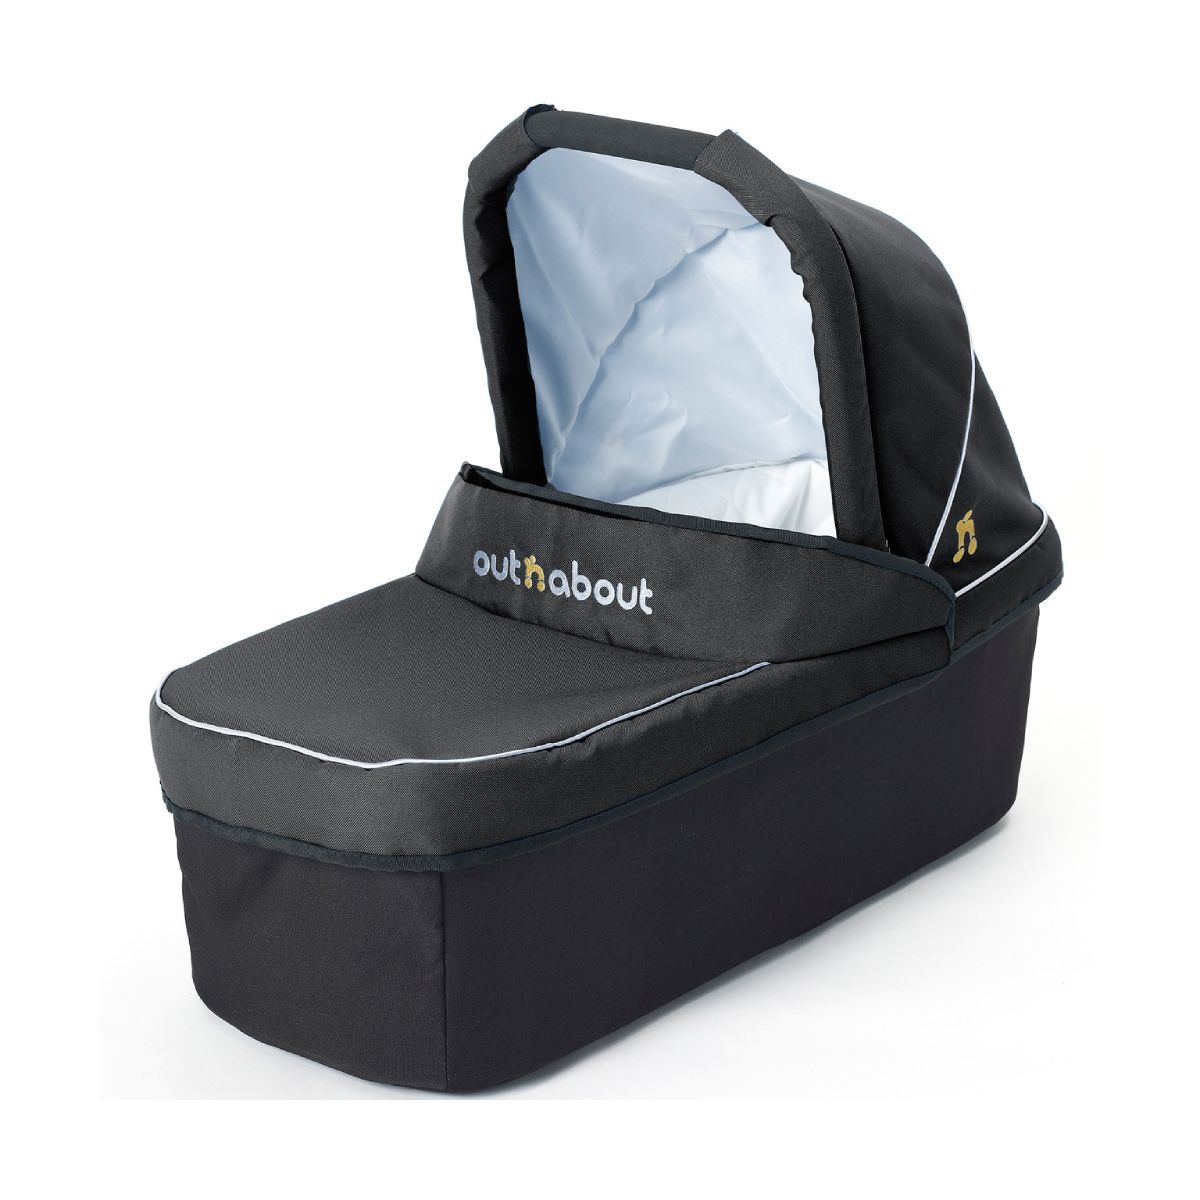 Out 'n' About Nipper Double Carrycot